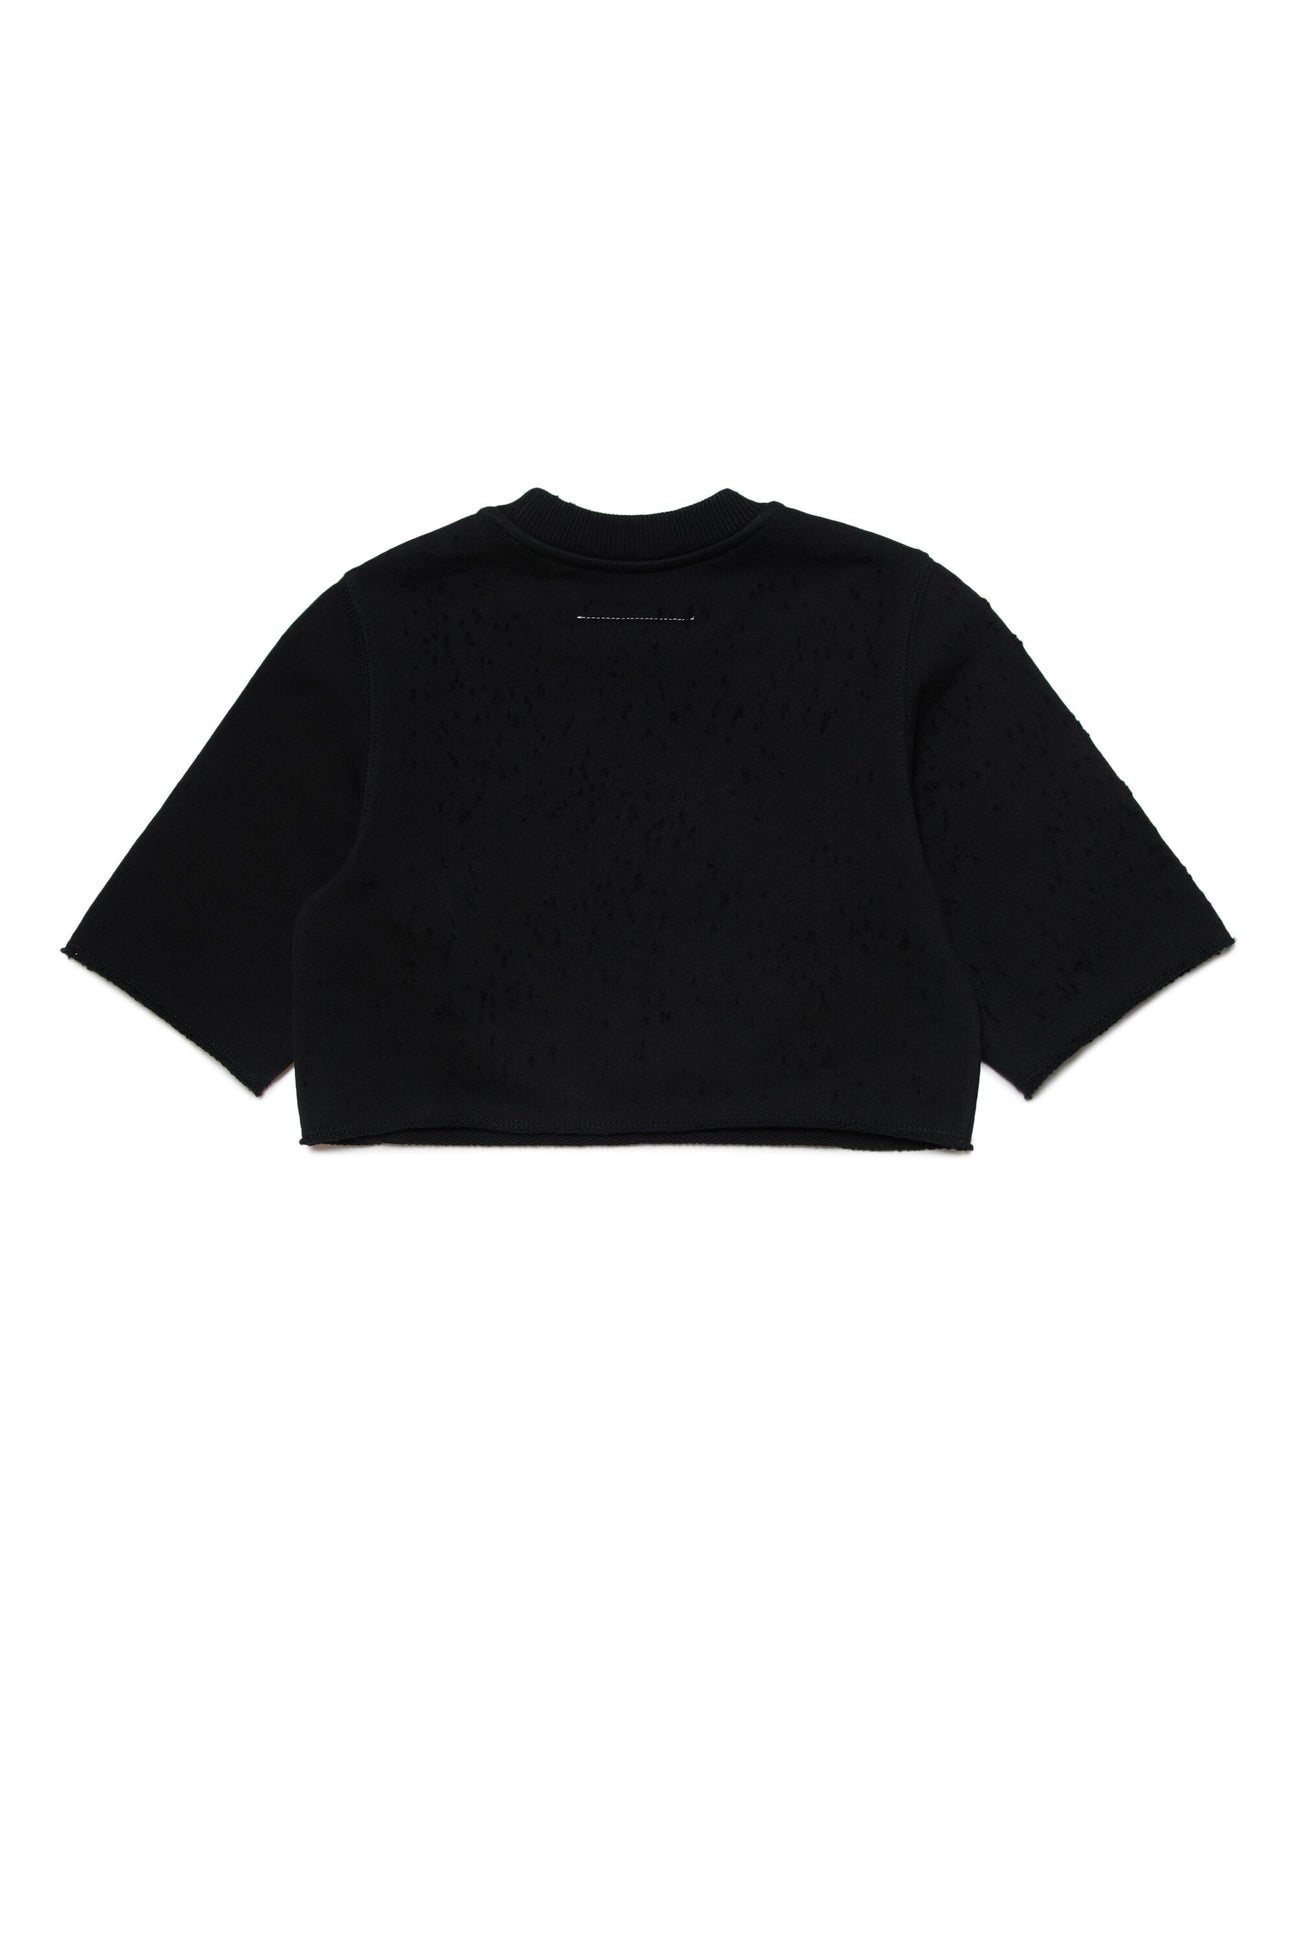 Cropped ripped sweatshirt branded with numeric logo Cropped ripped sweatshirt branded with numeric logo